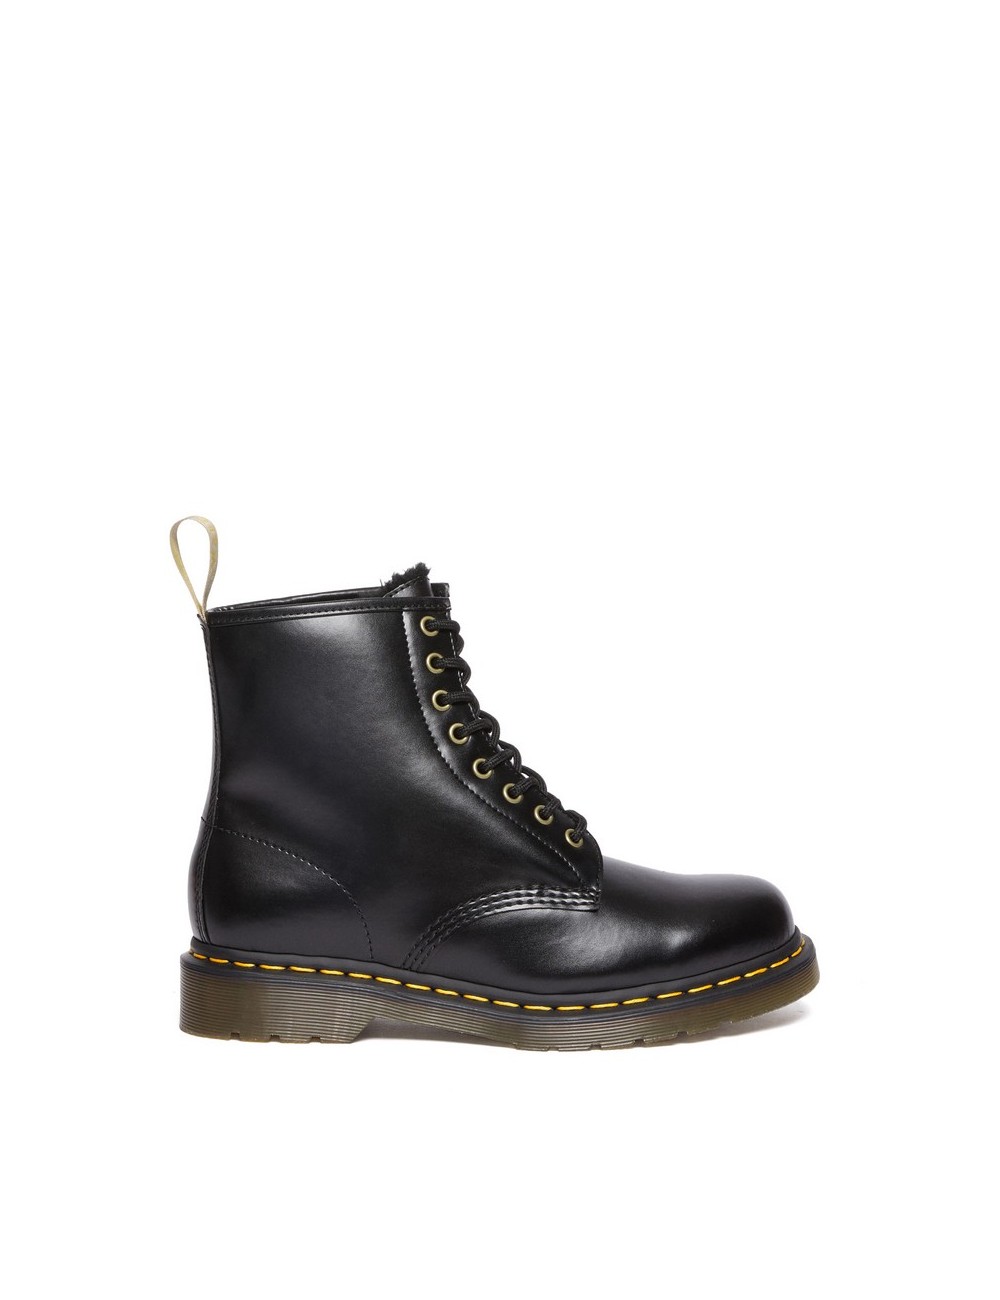 DR MARTENS VEGAN 1460 BORG LINED LACE UP BOOTS